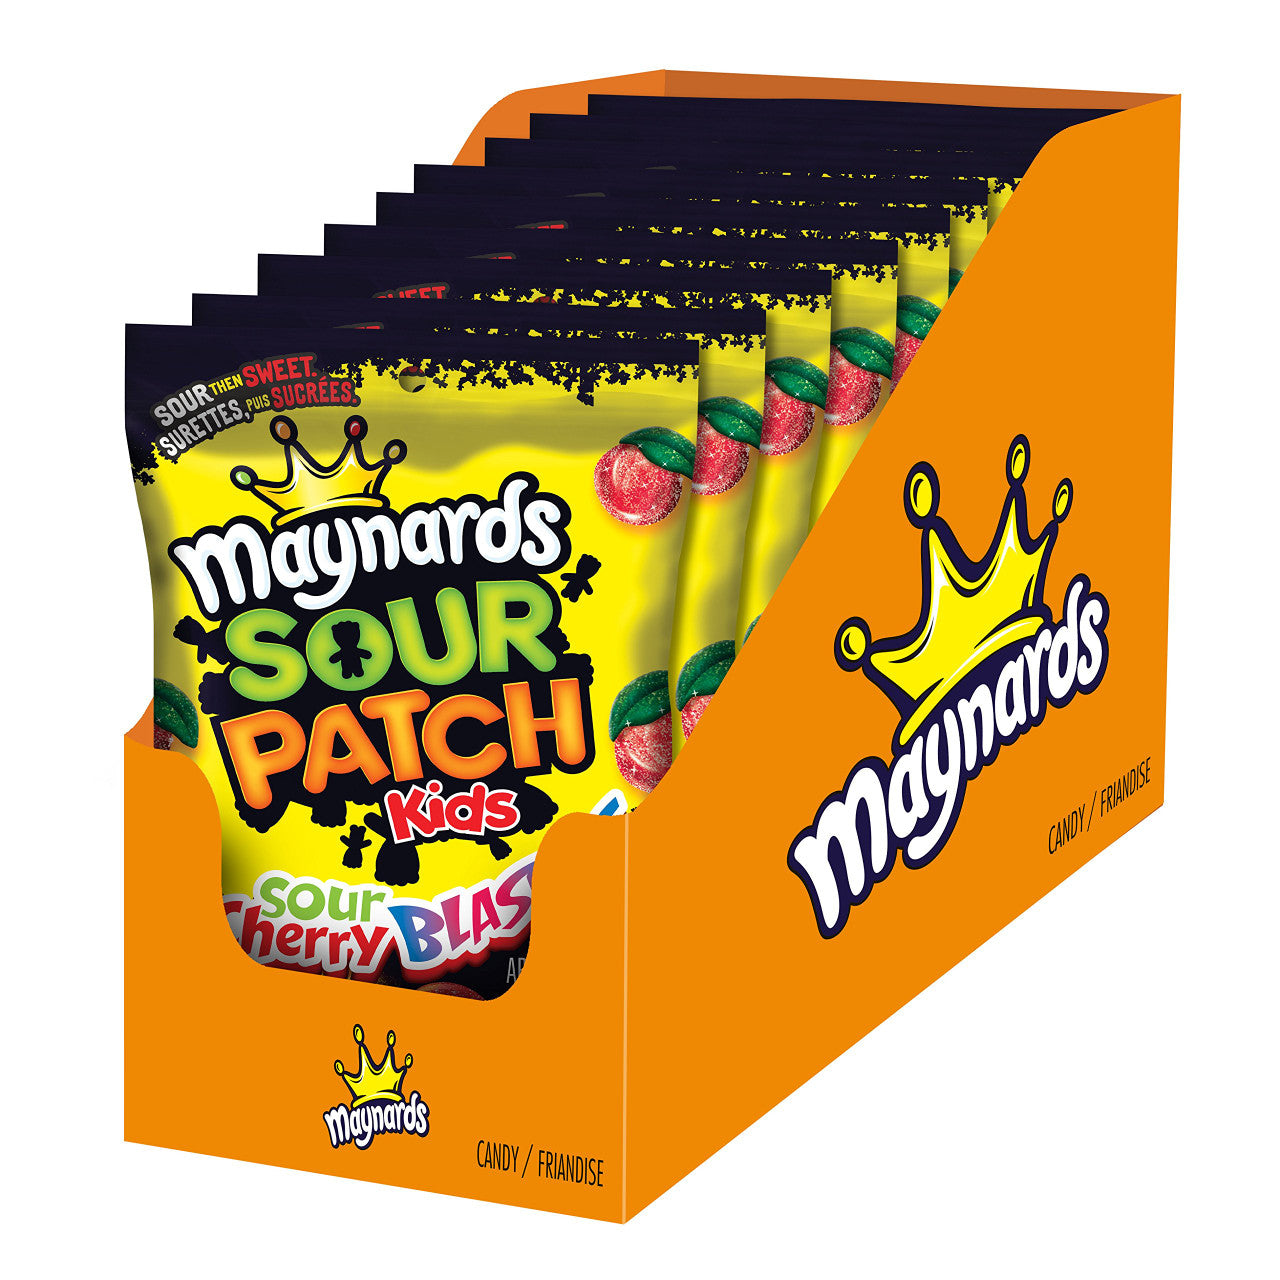 Maynards Sour Patch Kids Sour Cherry Blasters, 185g, 9 Count, Imported from Canada